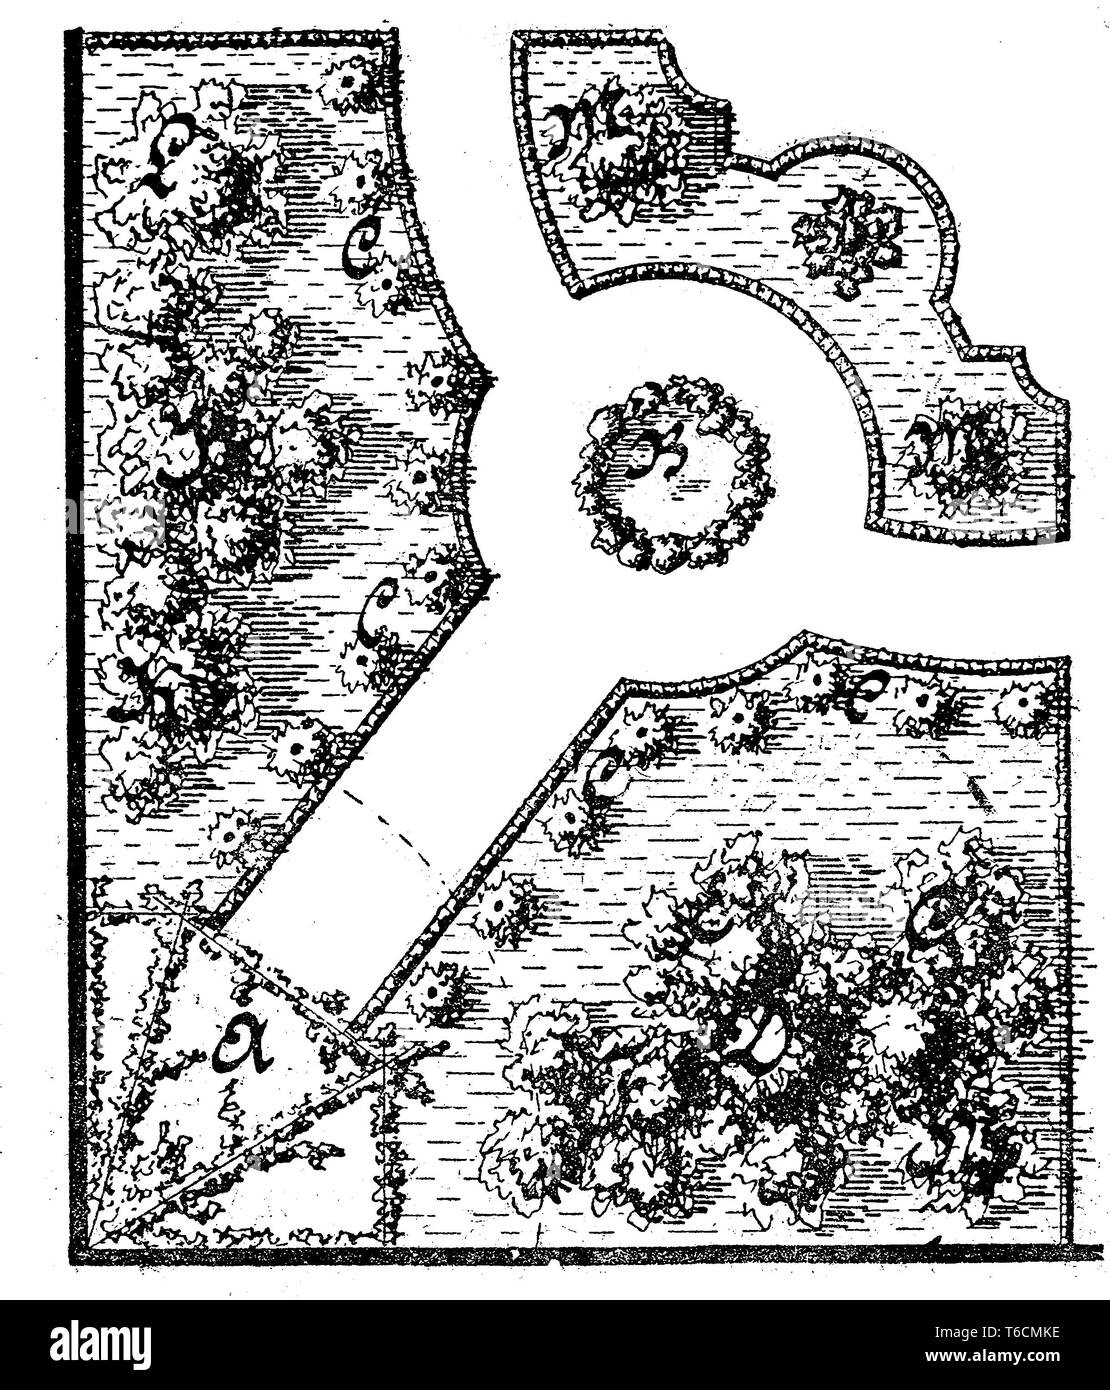 Map of landscaping an ornamental garden. Ornamental gardens use plants designed more for their aesthetic pleasure and appearance: flowering plants and bulbs in addition to foliage plants, ornamental grasses, shrubs and trees. Stock Photo